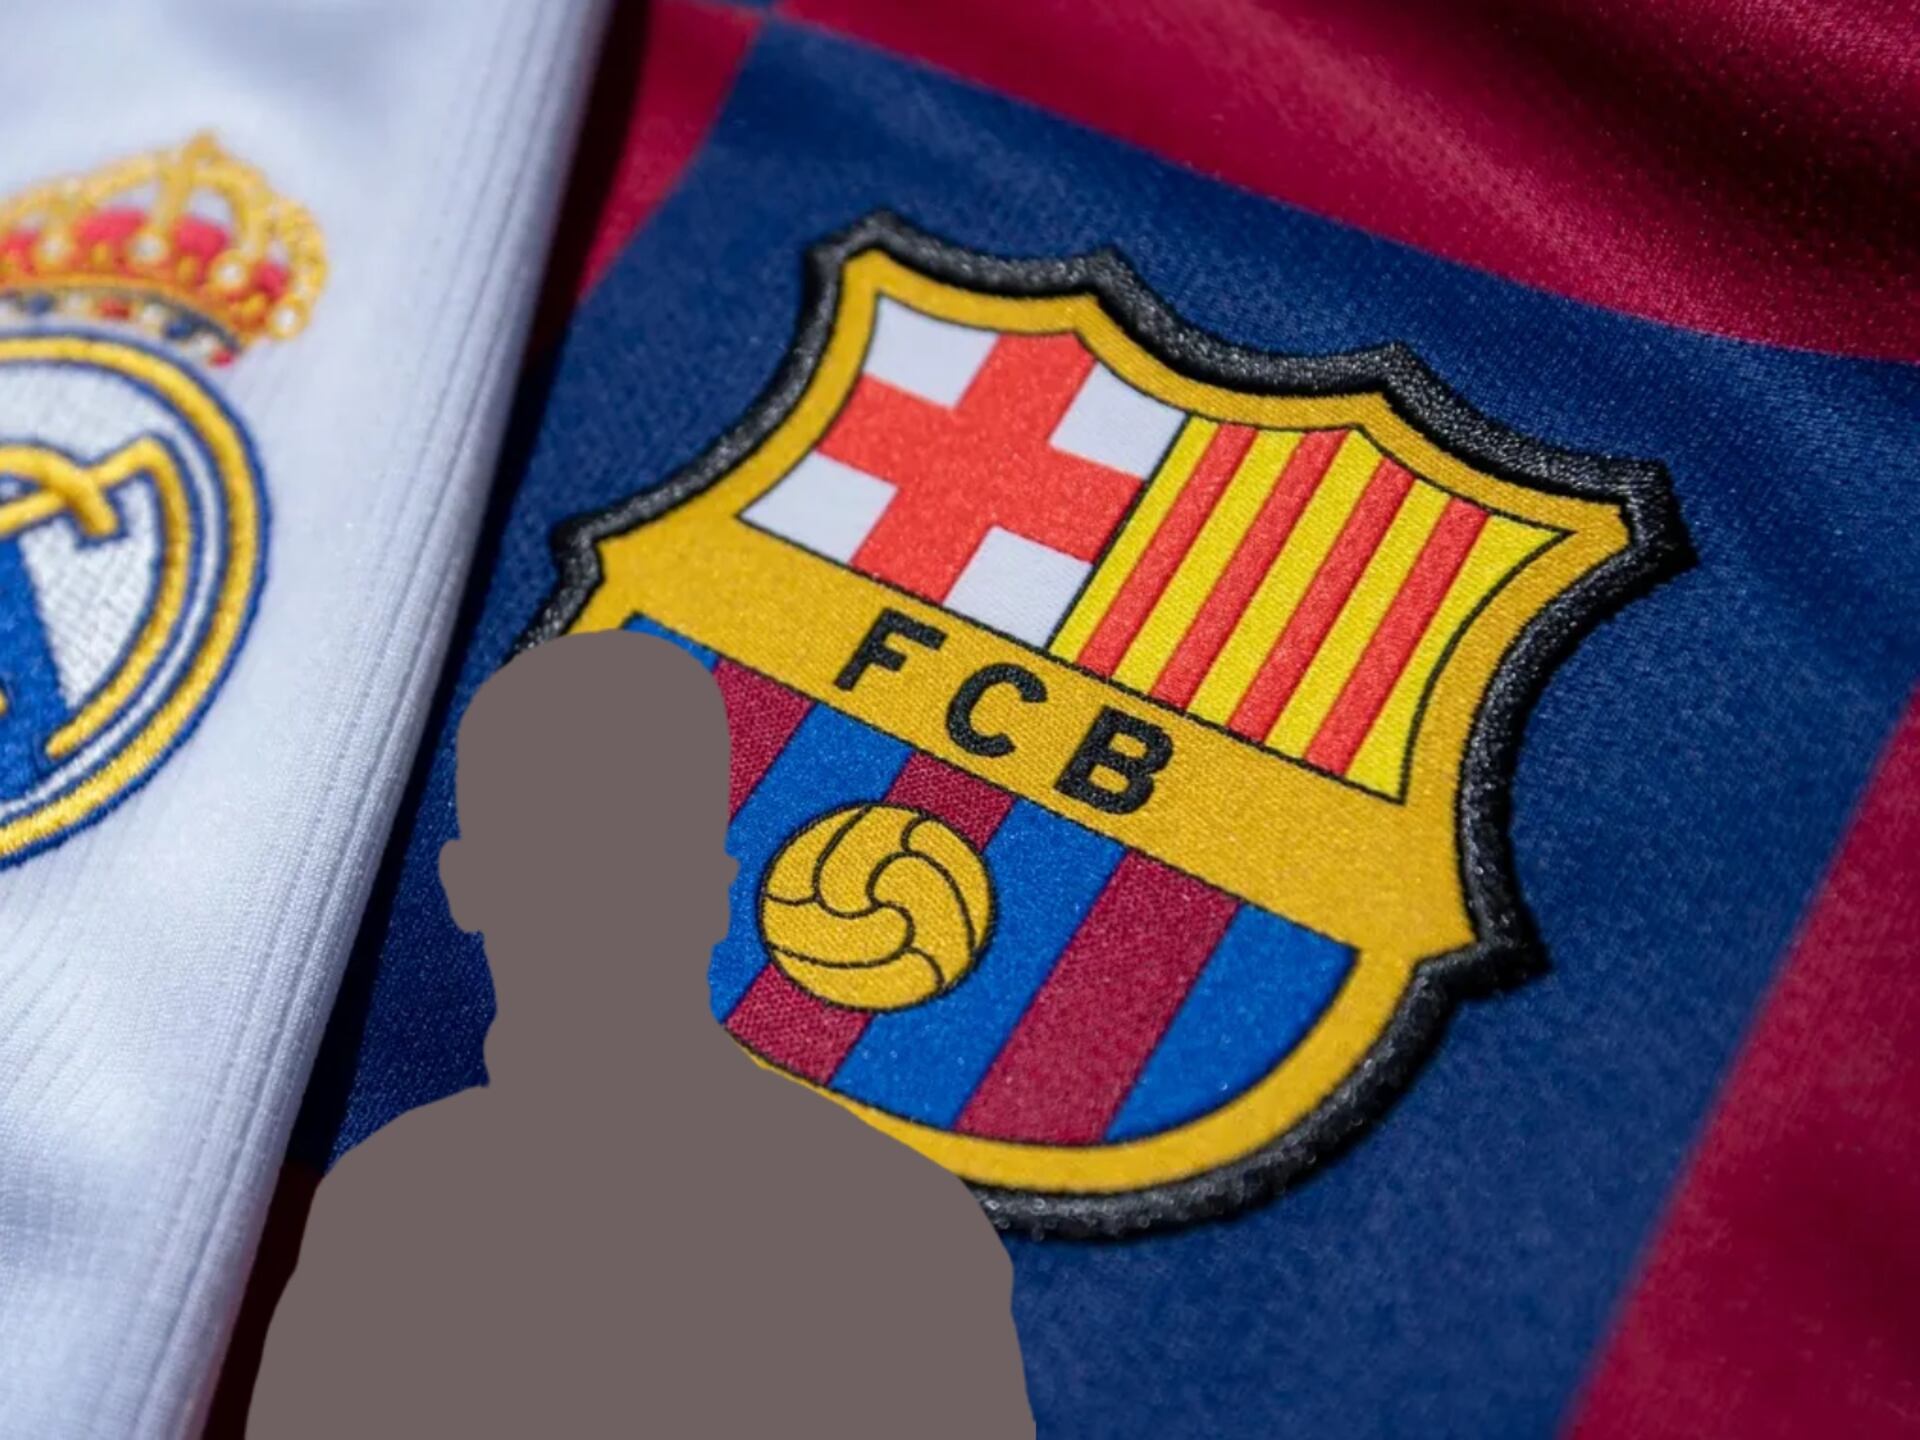 Hours before El Clasico, Barcelona's player who received threats before facing Real Madrid